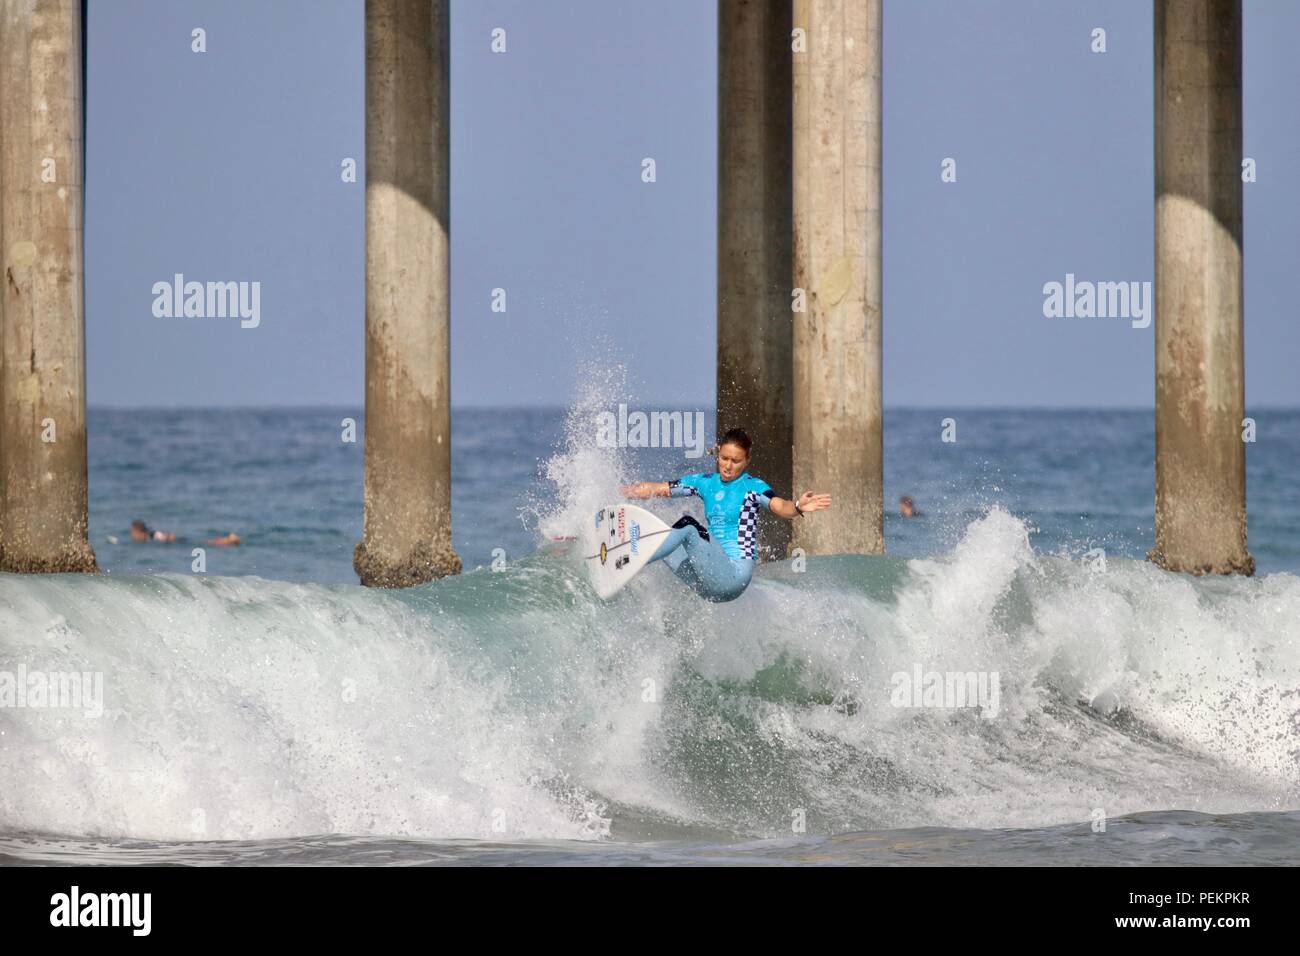 Sally Fitzgibbons competere nel US Open di surf 2018 Foto Stock